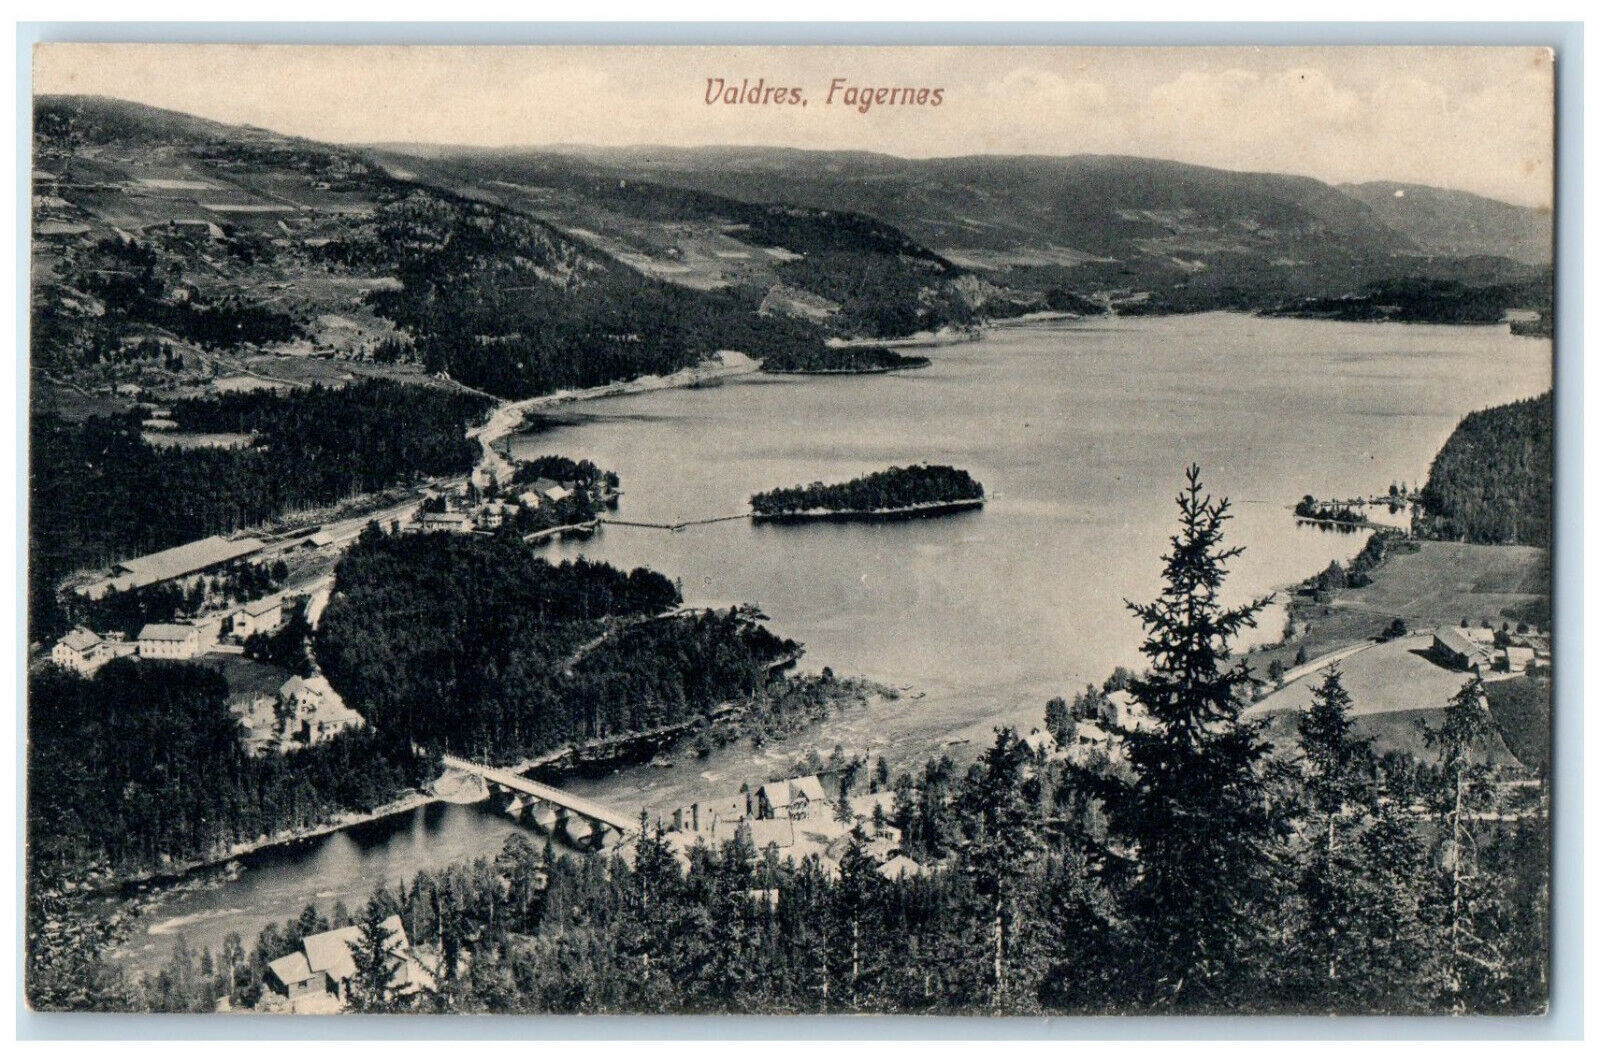 c1910 Valdres Fagernes Norway Aerial View of River Trees Buildings Postcard